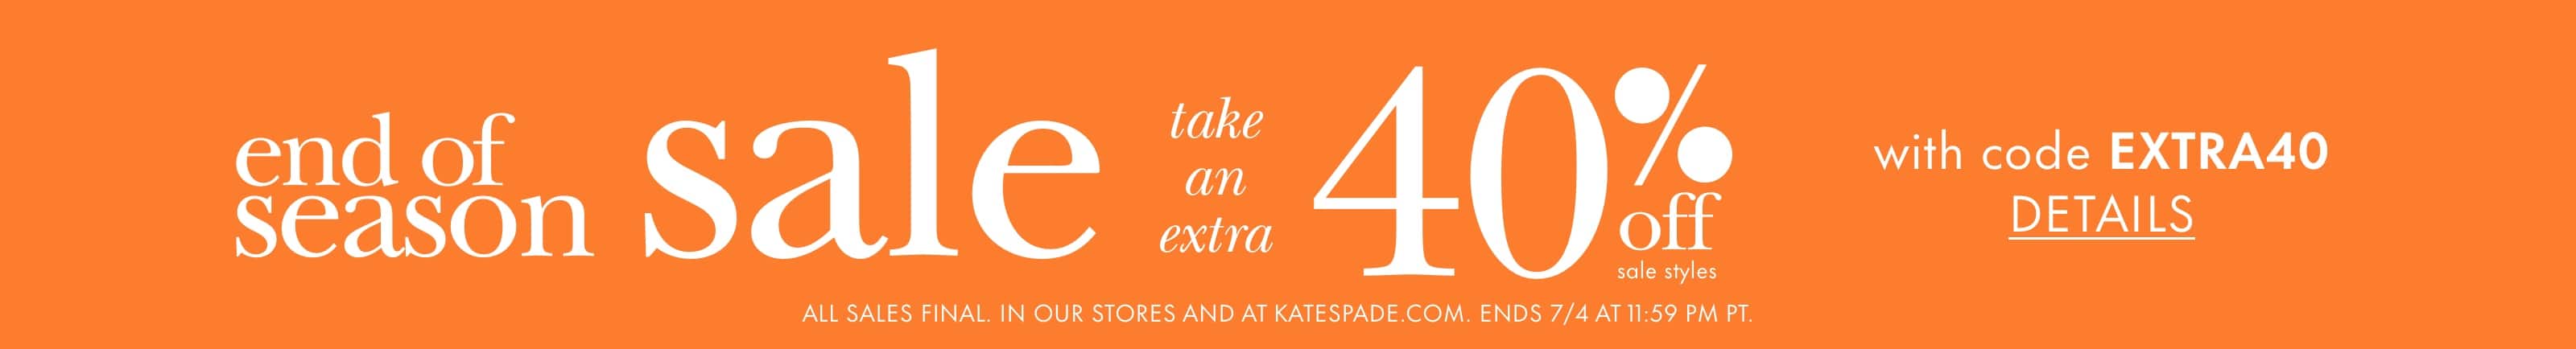 end of season sale. take an extra 40% off sale styles with code EXTRA40. details. ALL SALES FINAL. IN OUR STORES AND AT KATESPADE.COM. ENDS 7/4 AT 11:59 PM PT.